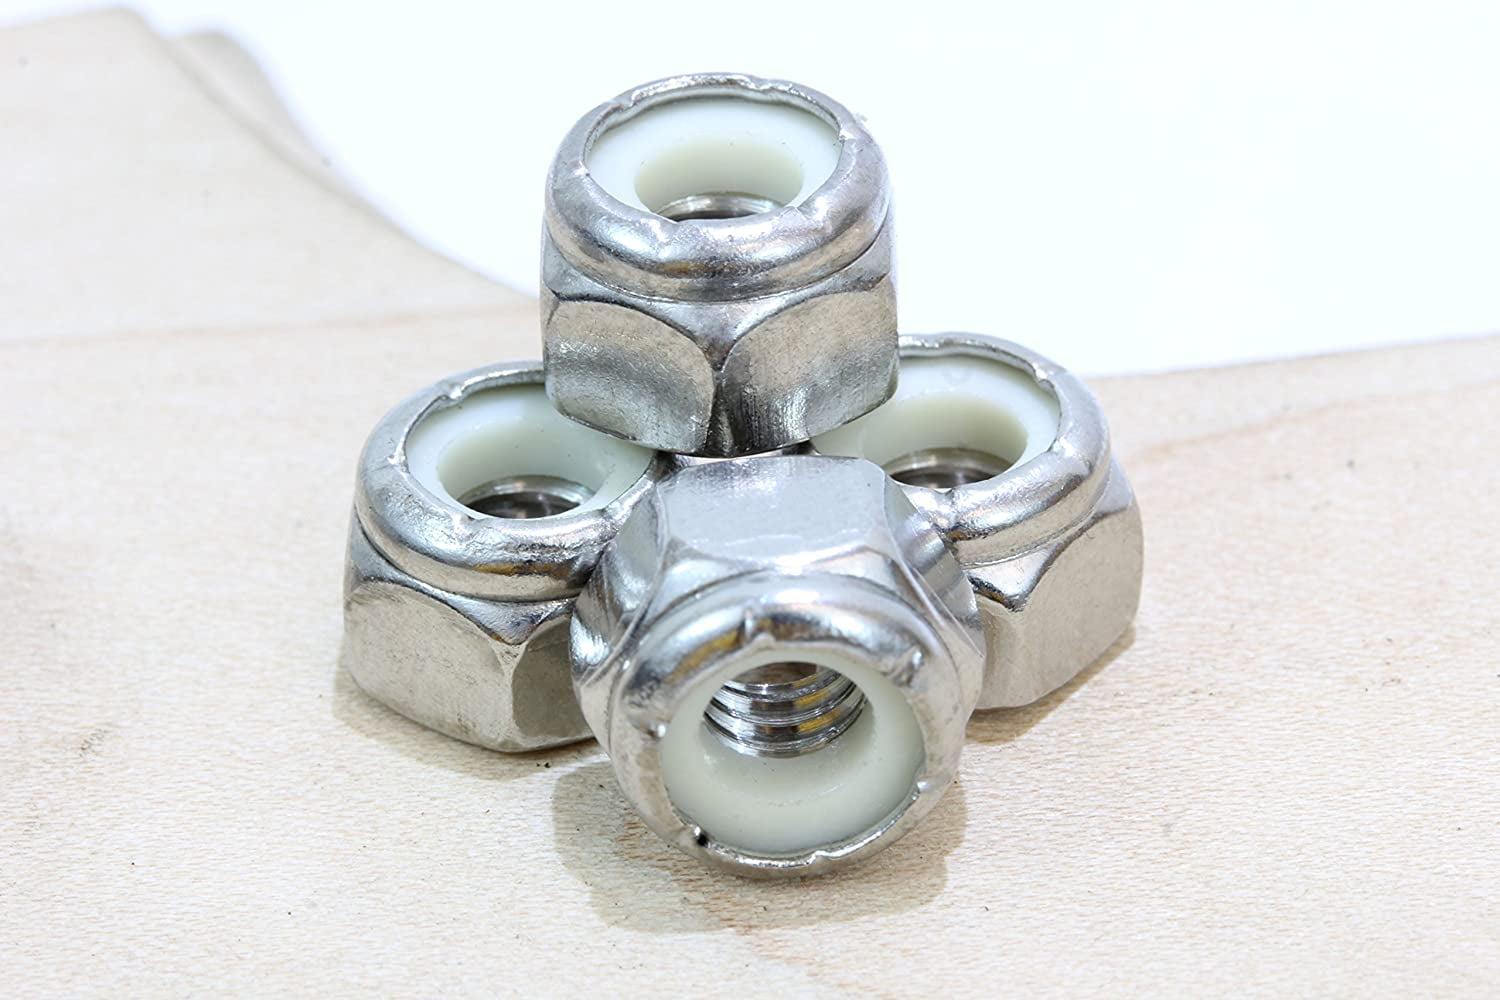 304 by Bolt Dropper #5-40 #4-40 #6-32 #12-24 Stainless Hex Lock Nut 10 Pack 